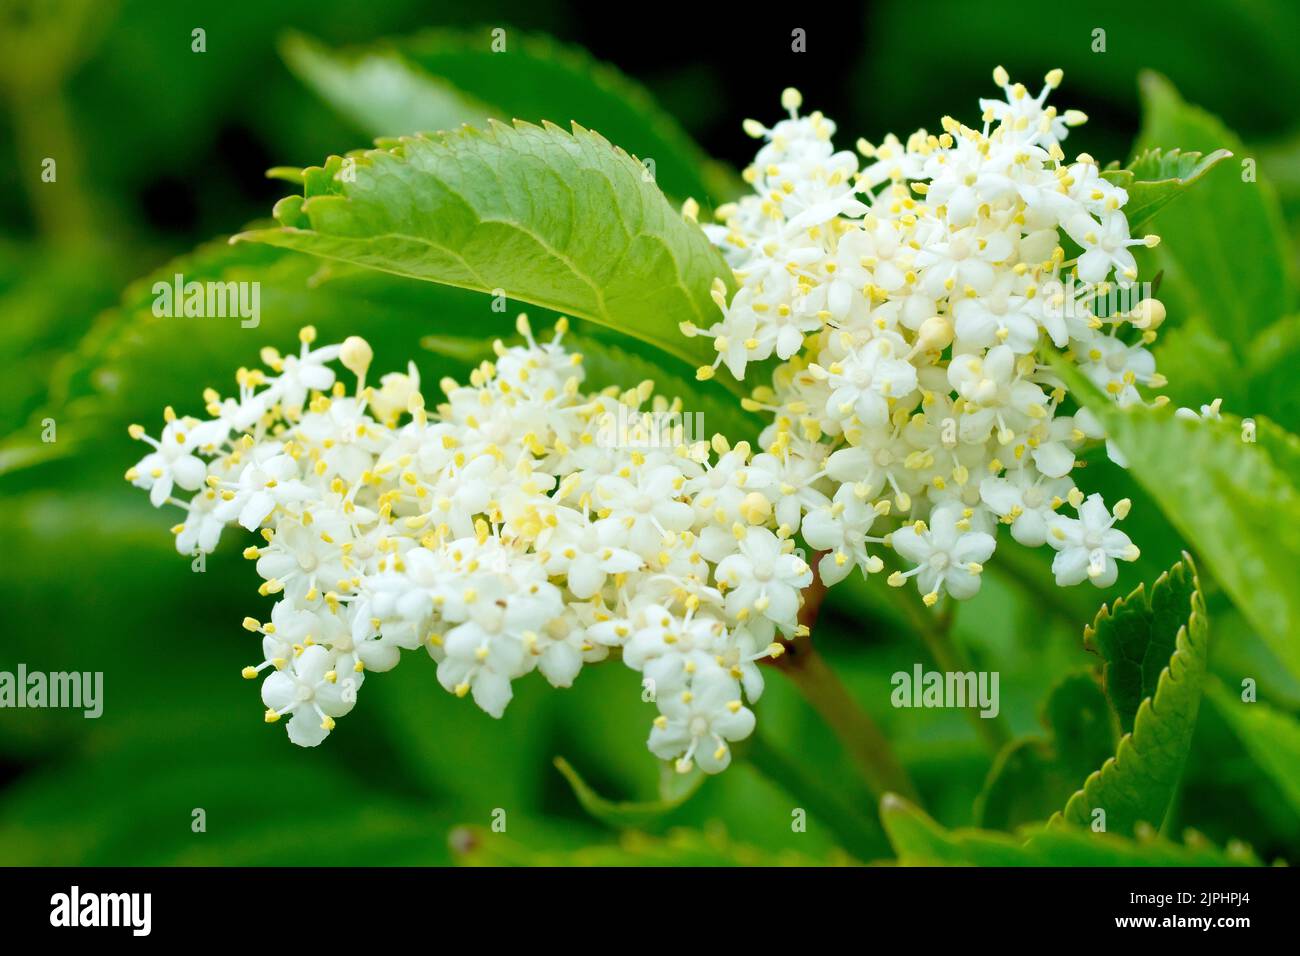 Elder (sambucus nigra), close up showing a single large spray of white flowers produced by the shrub in the spring. Stock Photo